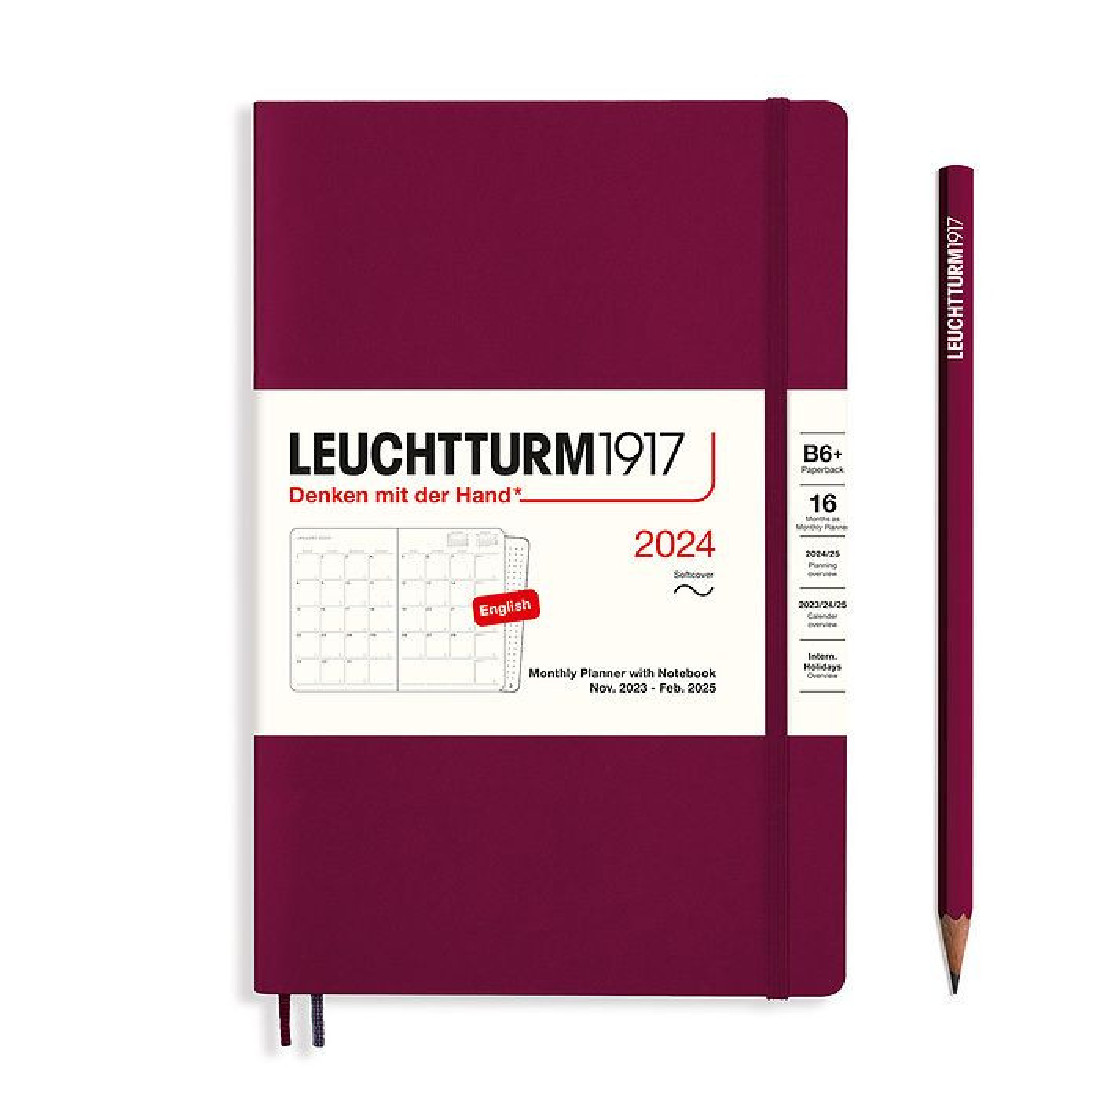 Leuchtturm 1917 Monthly Planner and Notebook 2024 Port Red Paperback B6 Plus Soft Cover